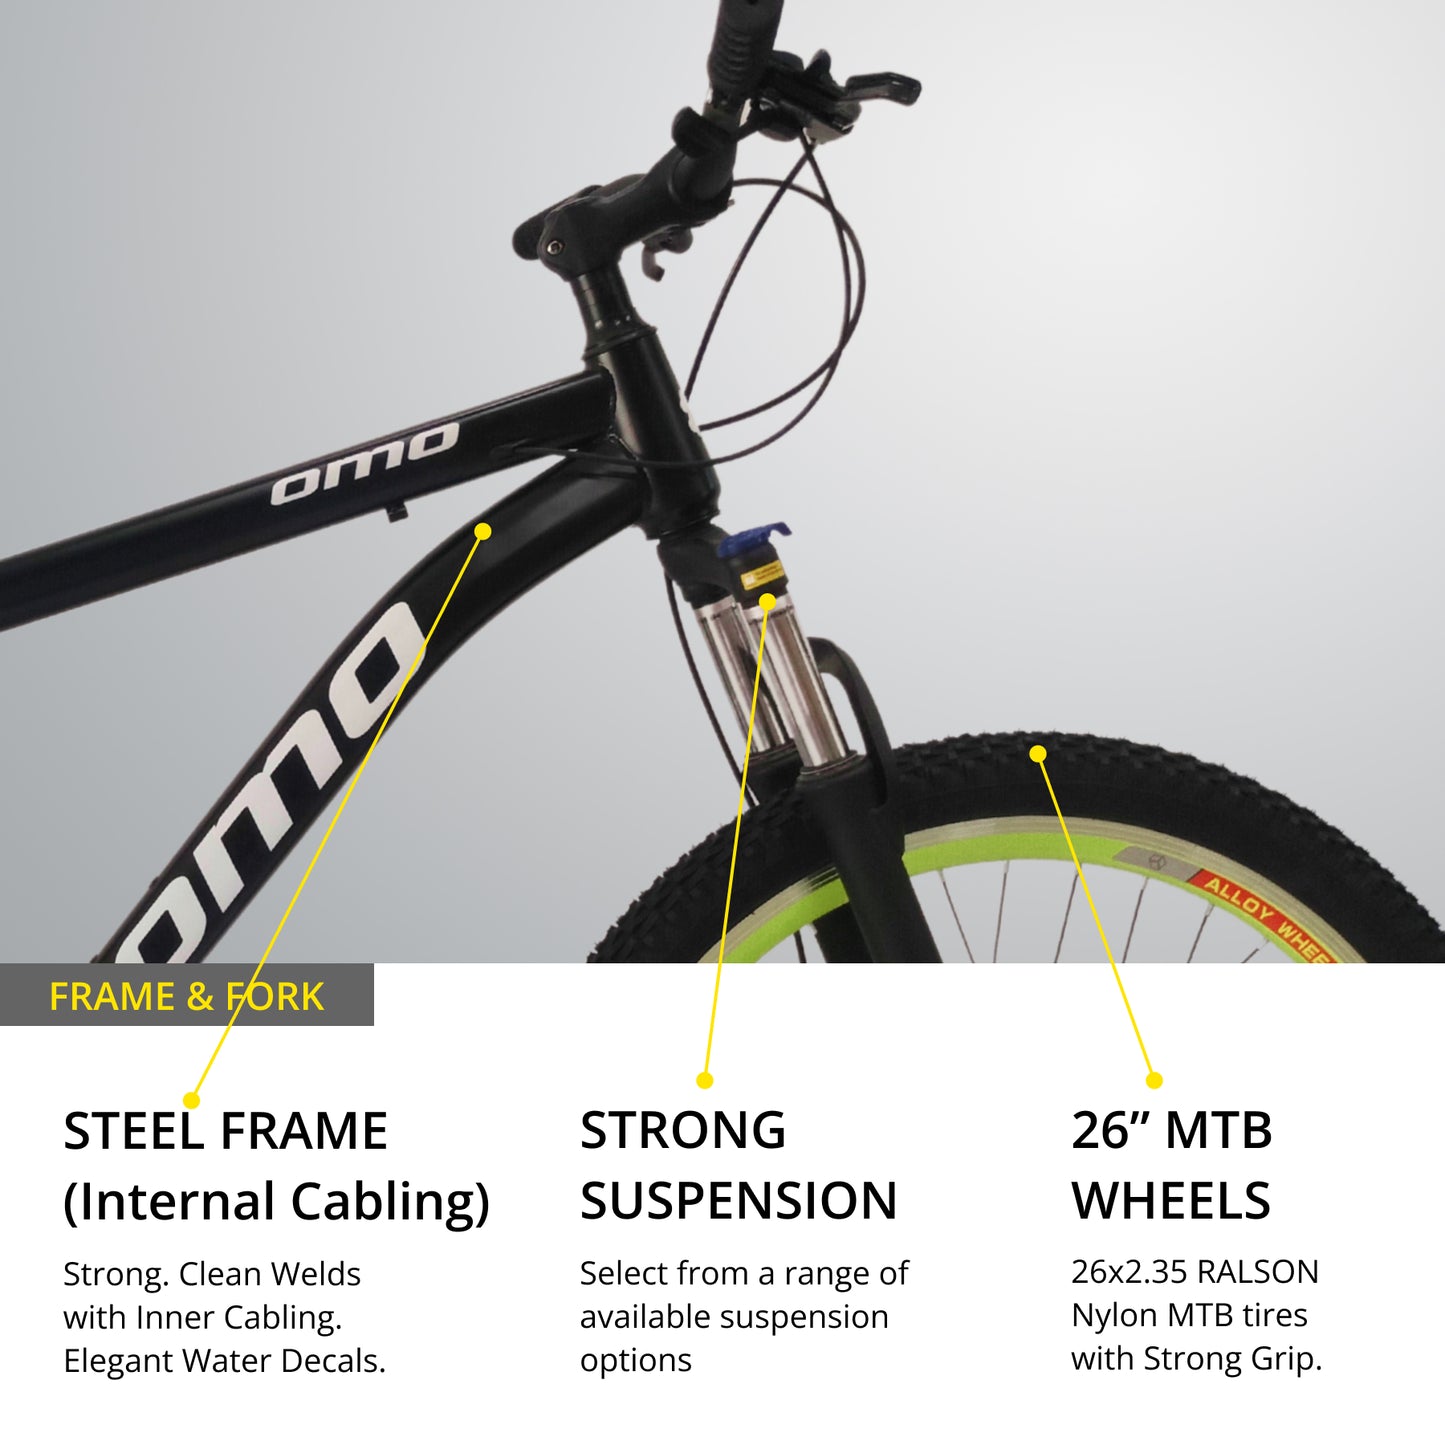 omobikes steel MTB bike manali with strong steel frame inner cabling lockout suspension and shimano gear altus shifter